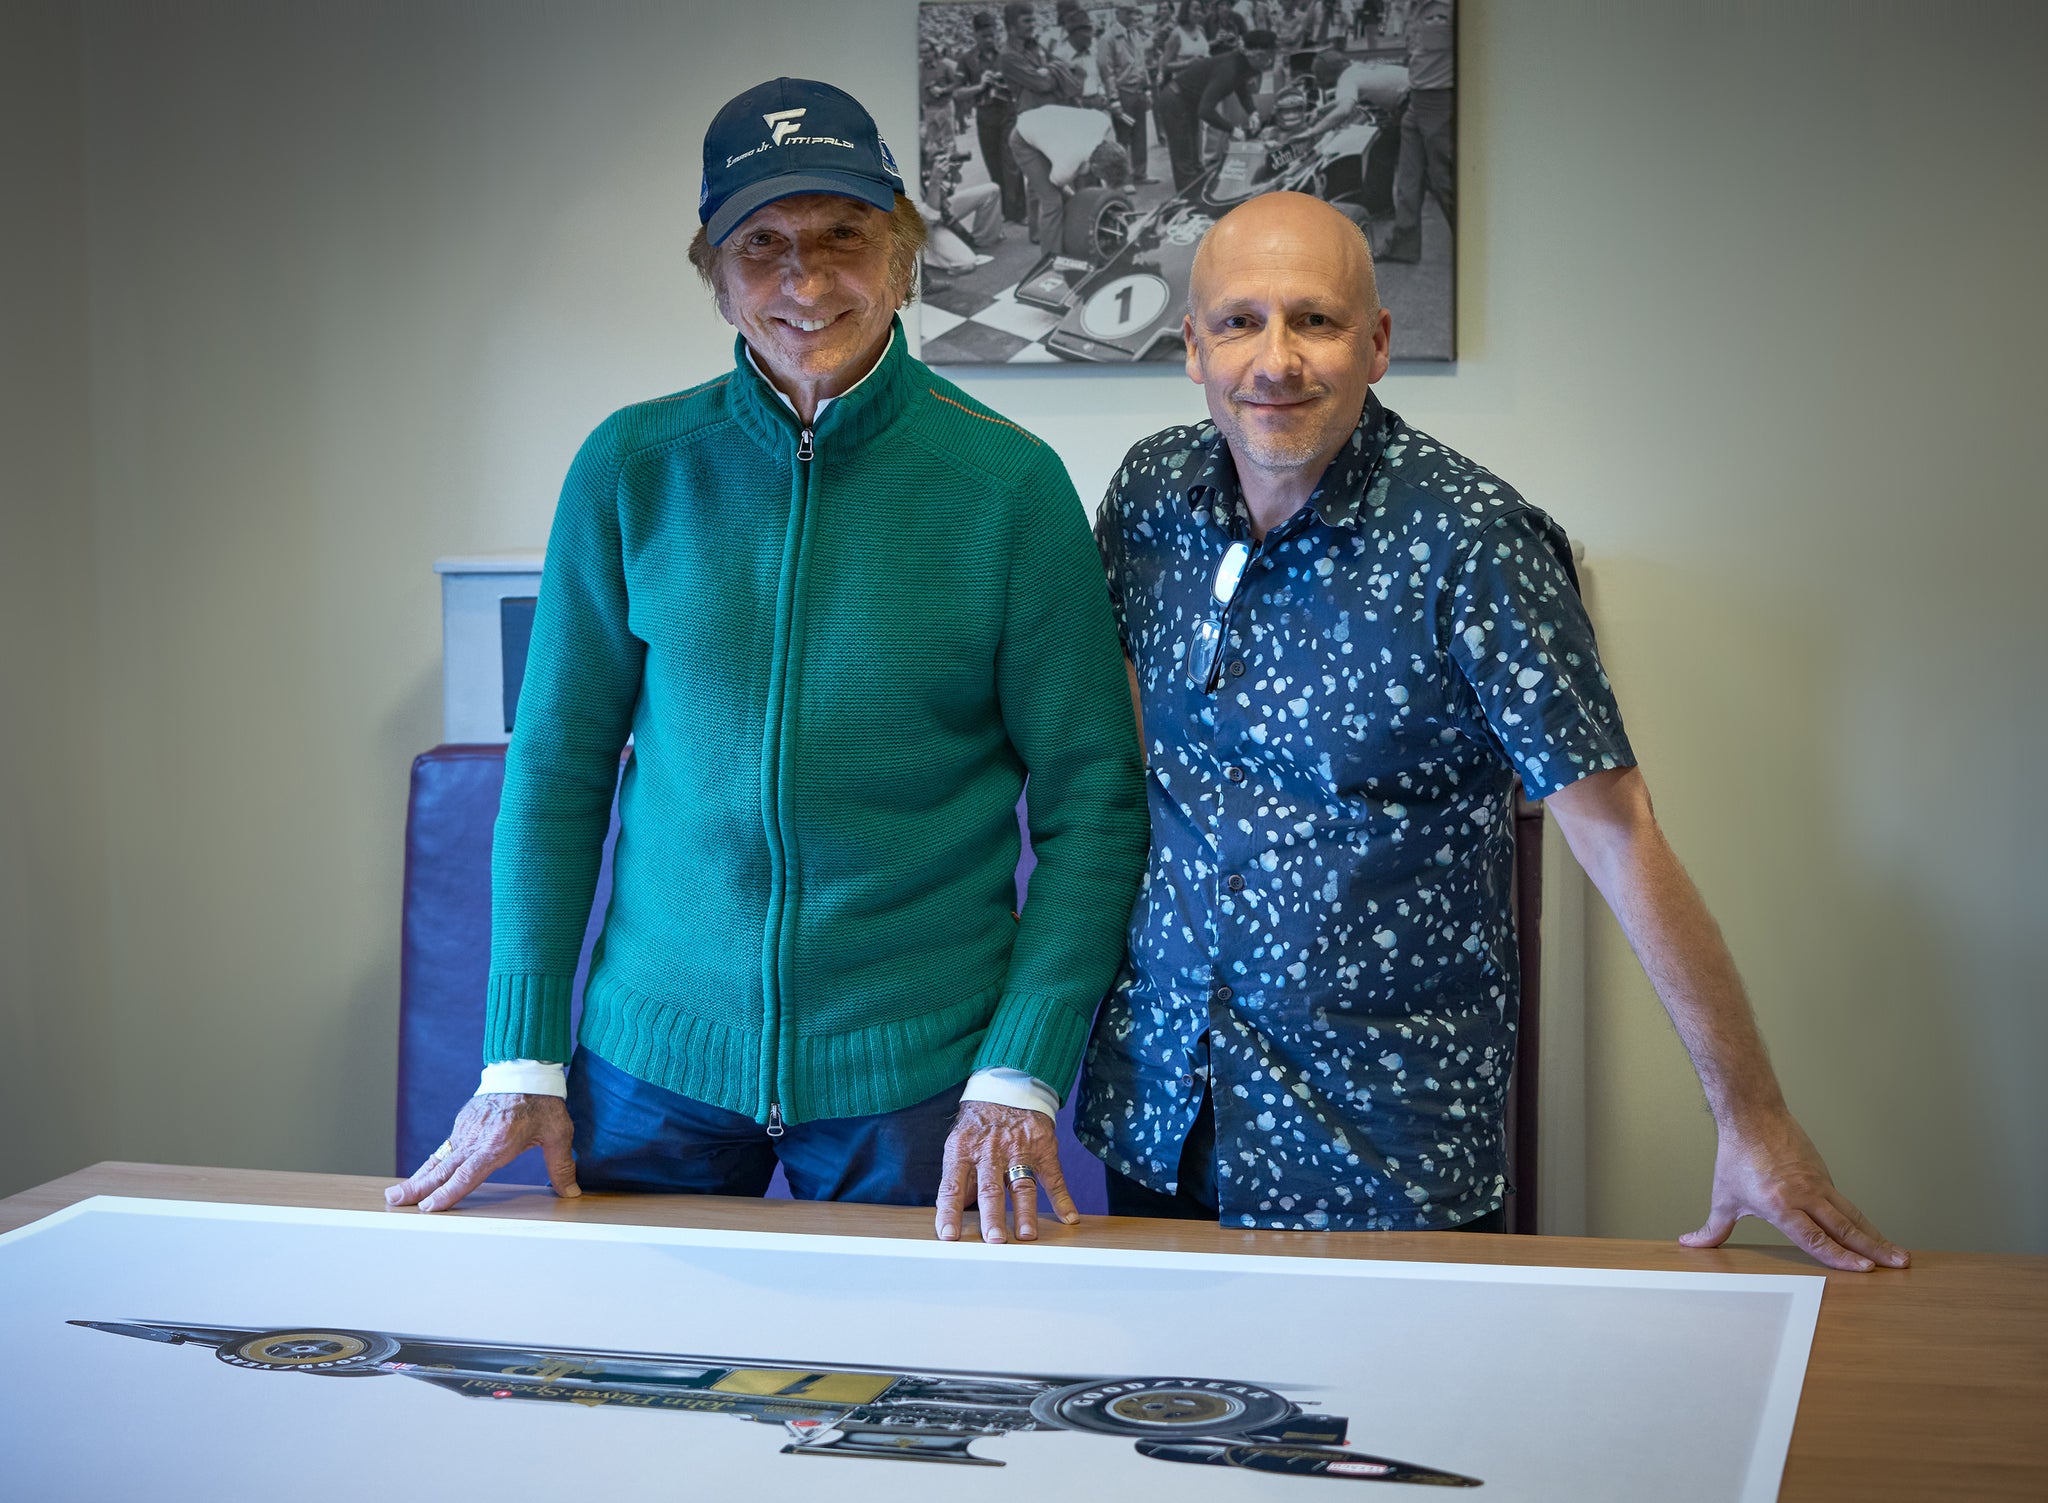 Alan Thornton, artist and photographer, and Emerson Fittipaldi, two-time Formula 1 World Drivers' Champion